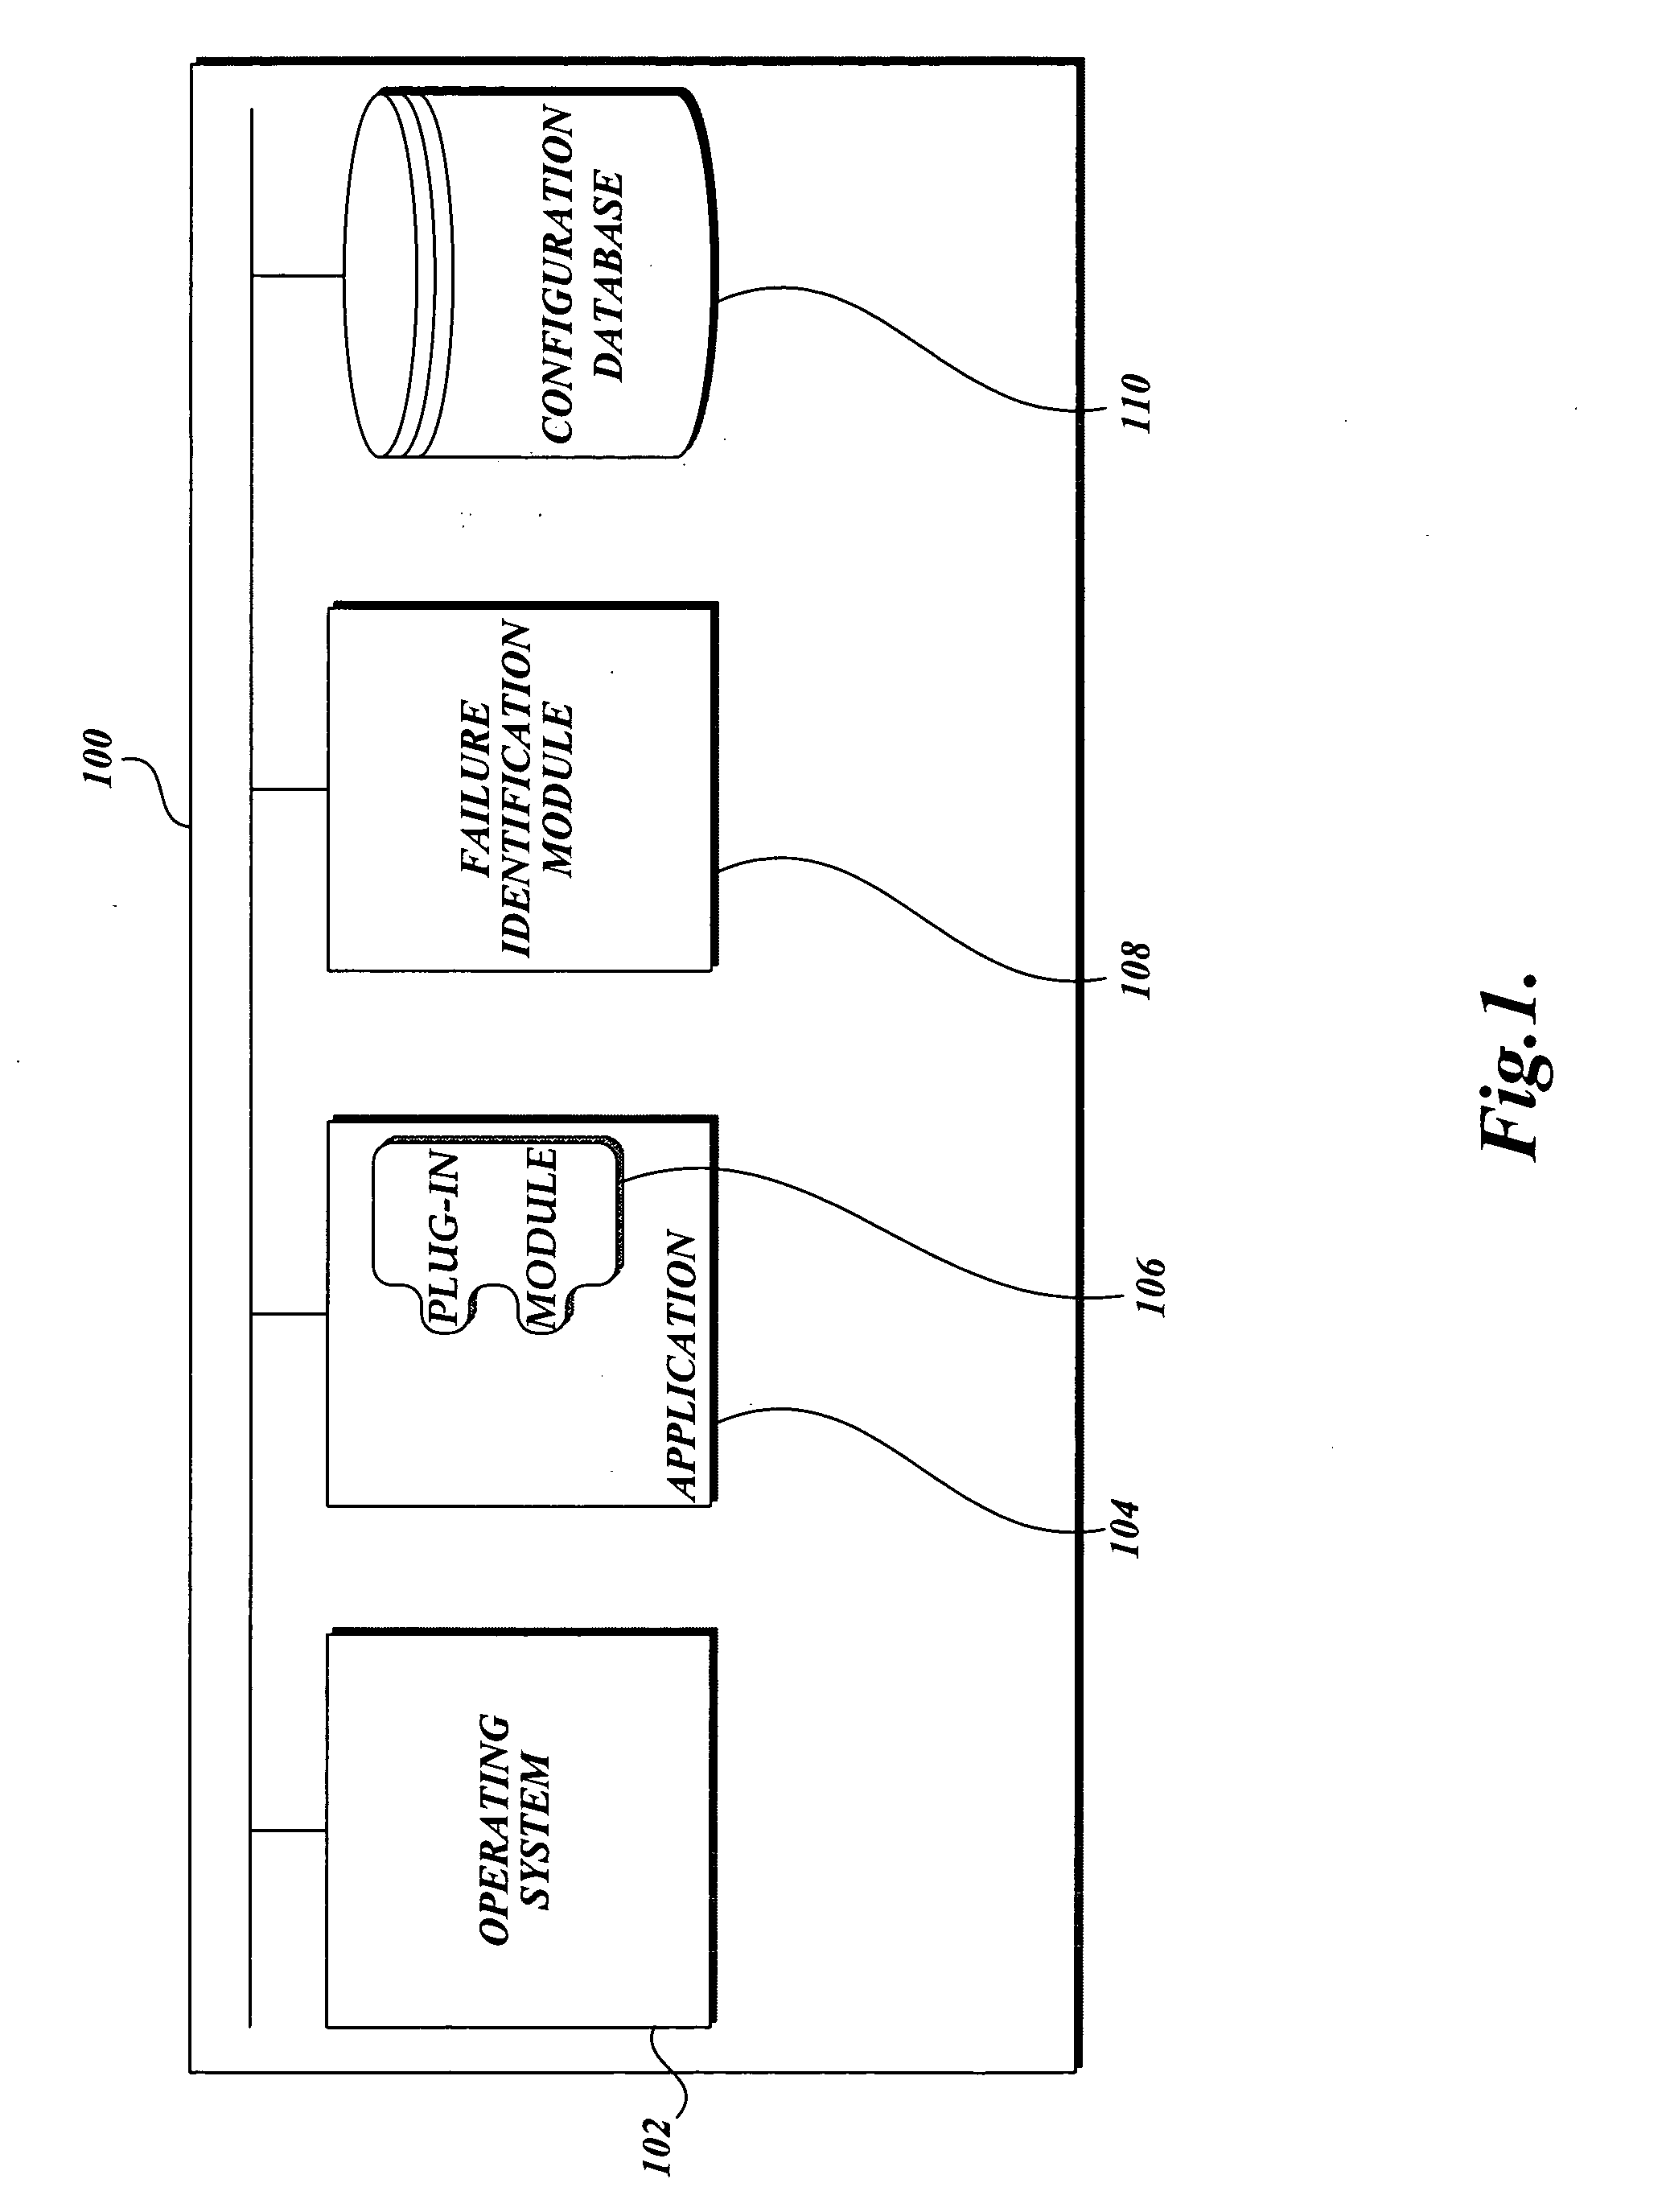 System and method of identifying the source of a failure